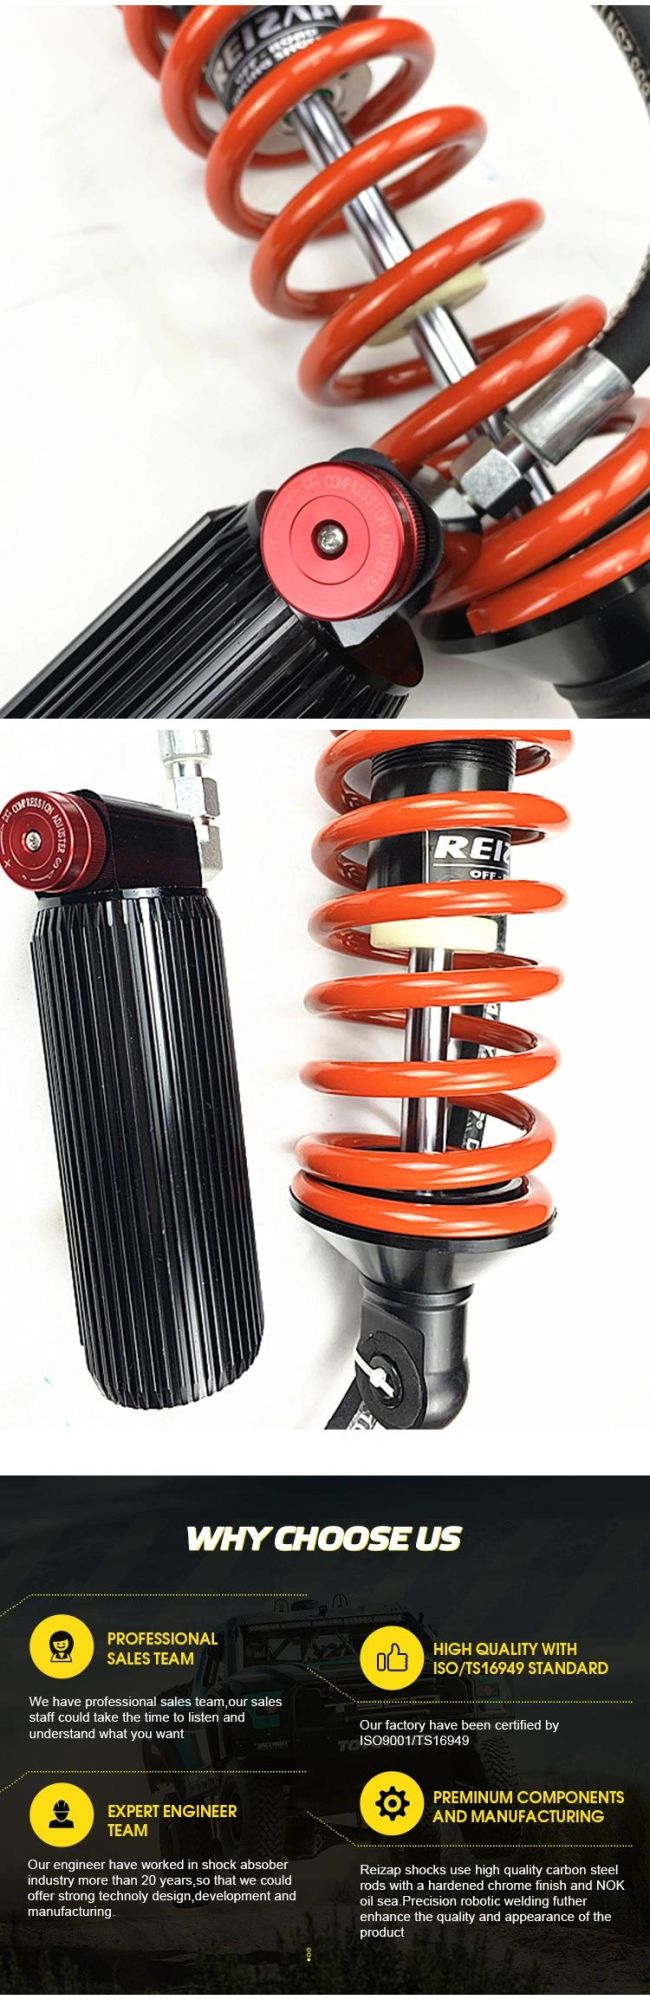 High Performance Adjustable 4WD Racing Suspension 4X4 Coilover Shock Absorber Buggy Shock 2.5" Coil Over 16" Stroke/Travel